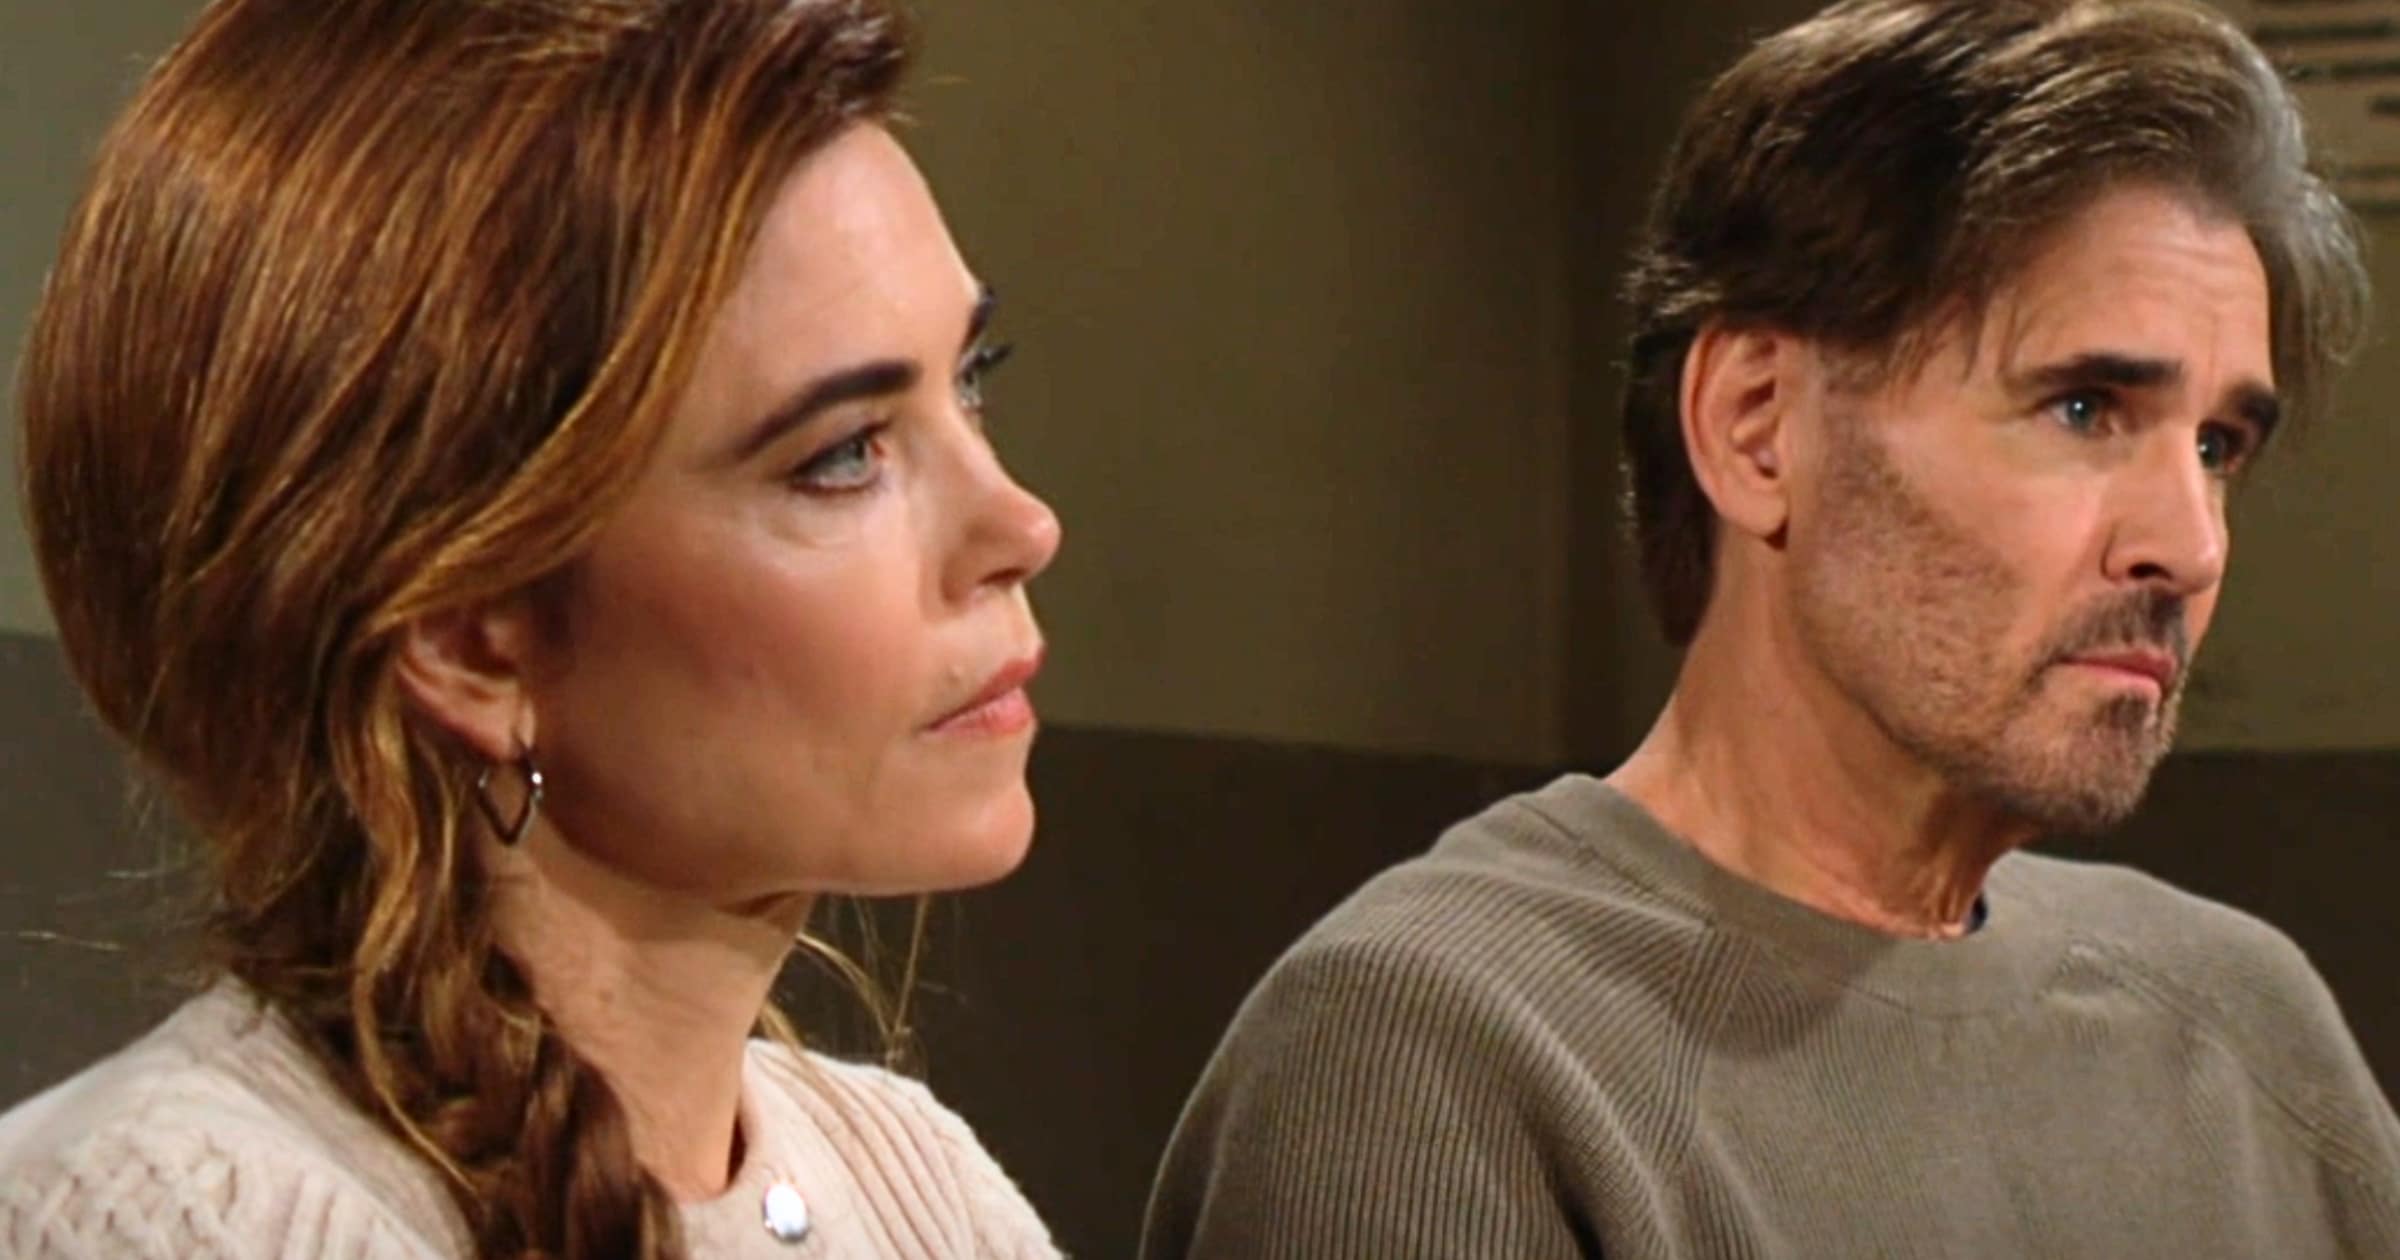 The Young and the Restless - Dec 5 - Victoria and Cole